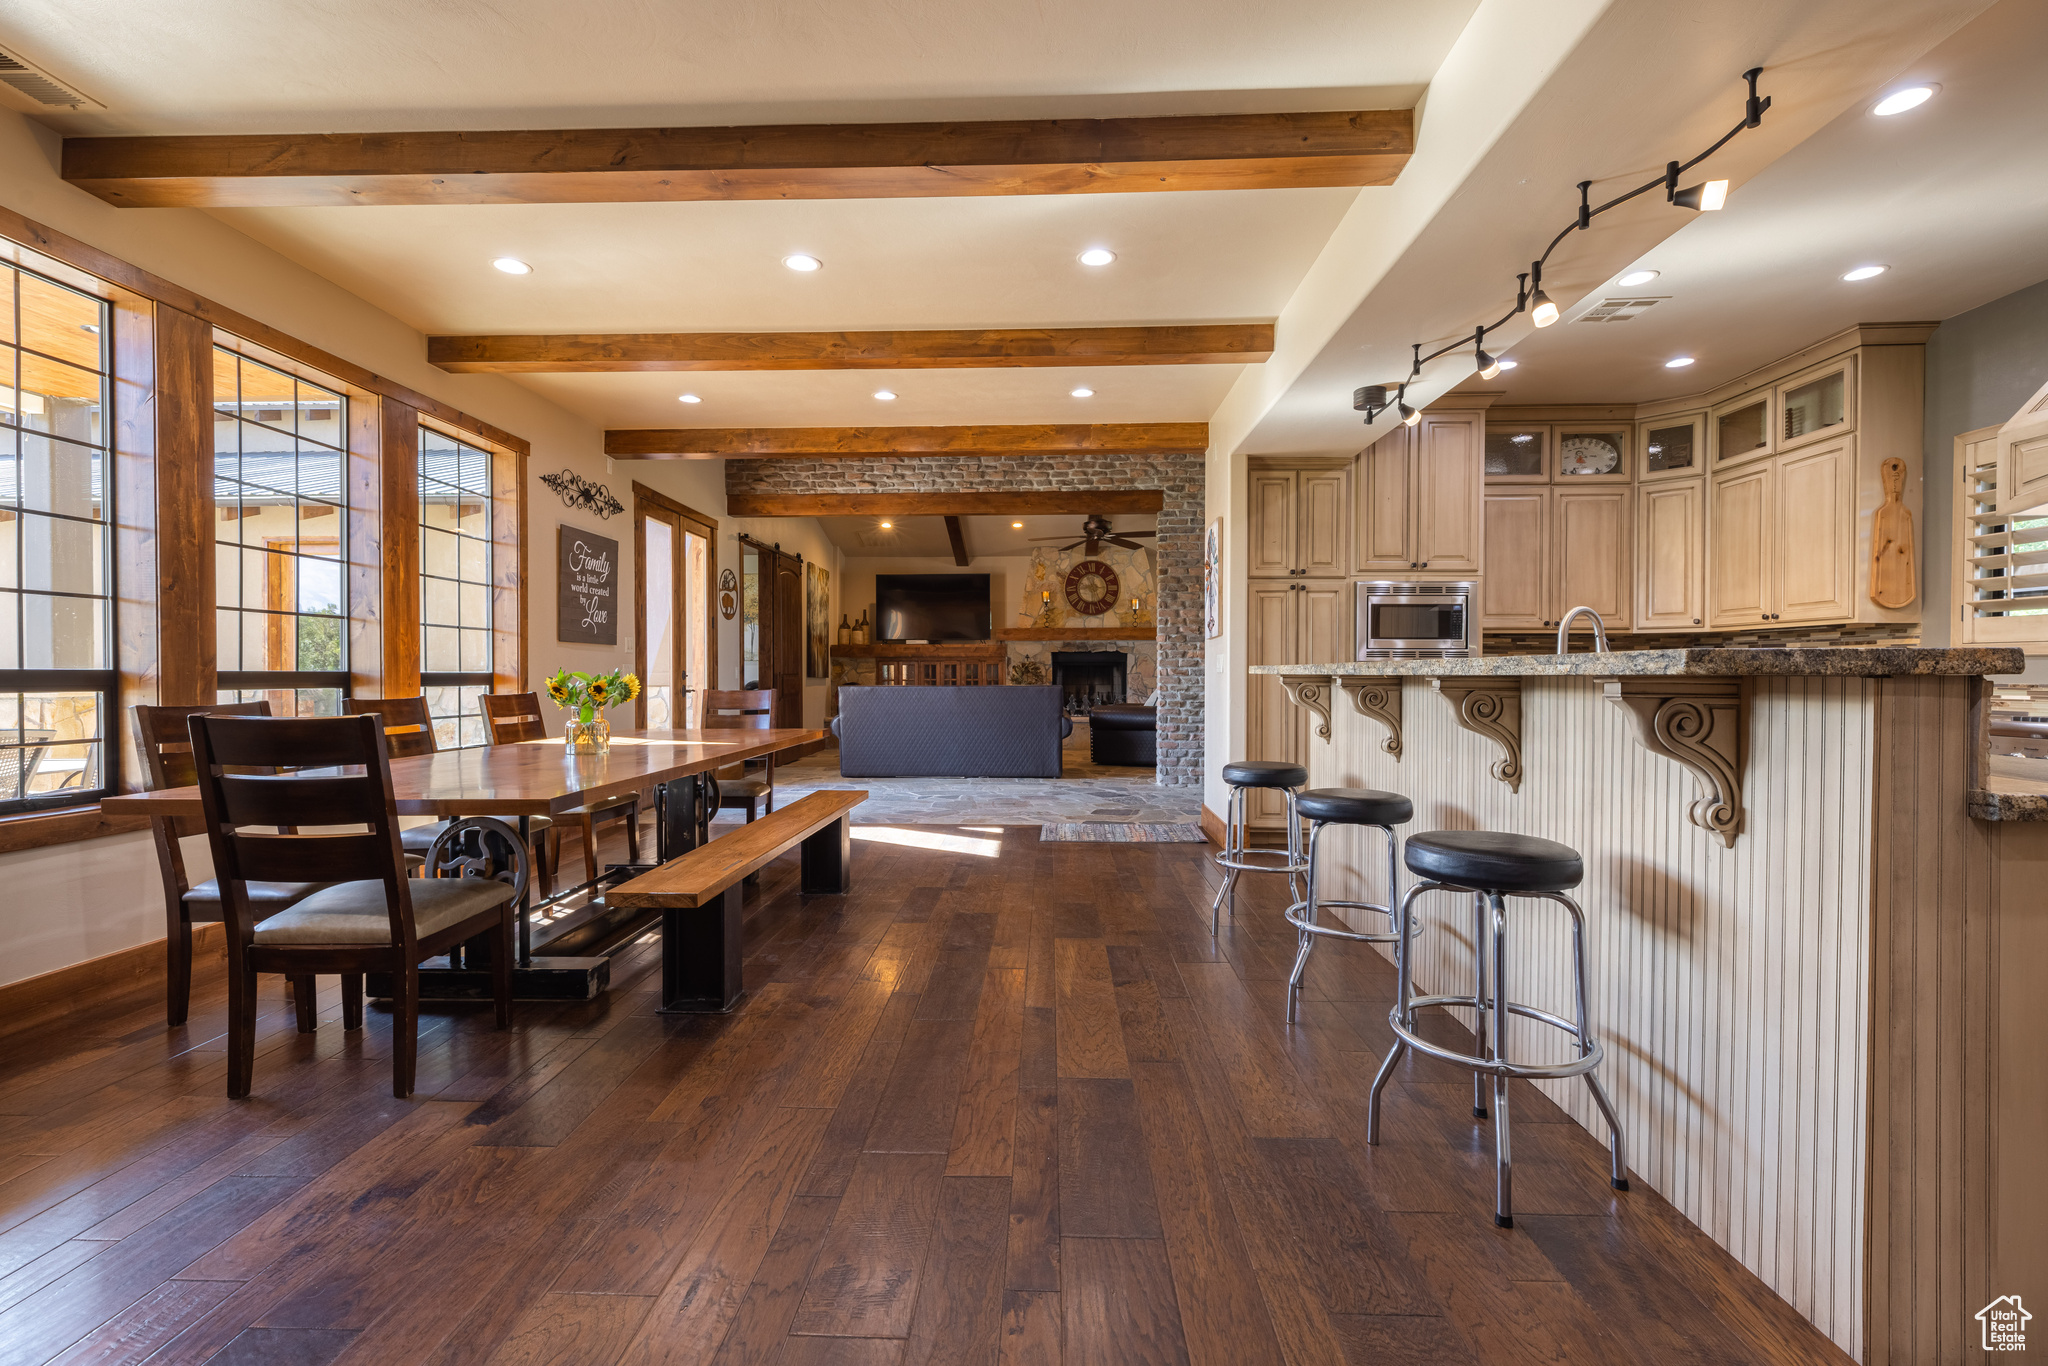 Dining area with beamed ceiling, sink, hardwood / wood-style flooring, and a stone fireplace